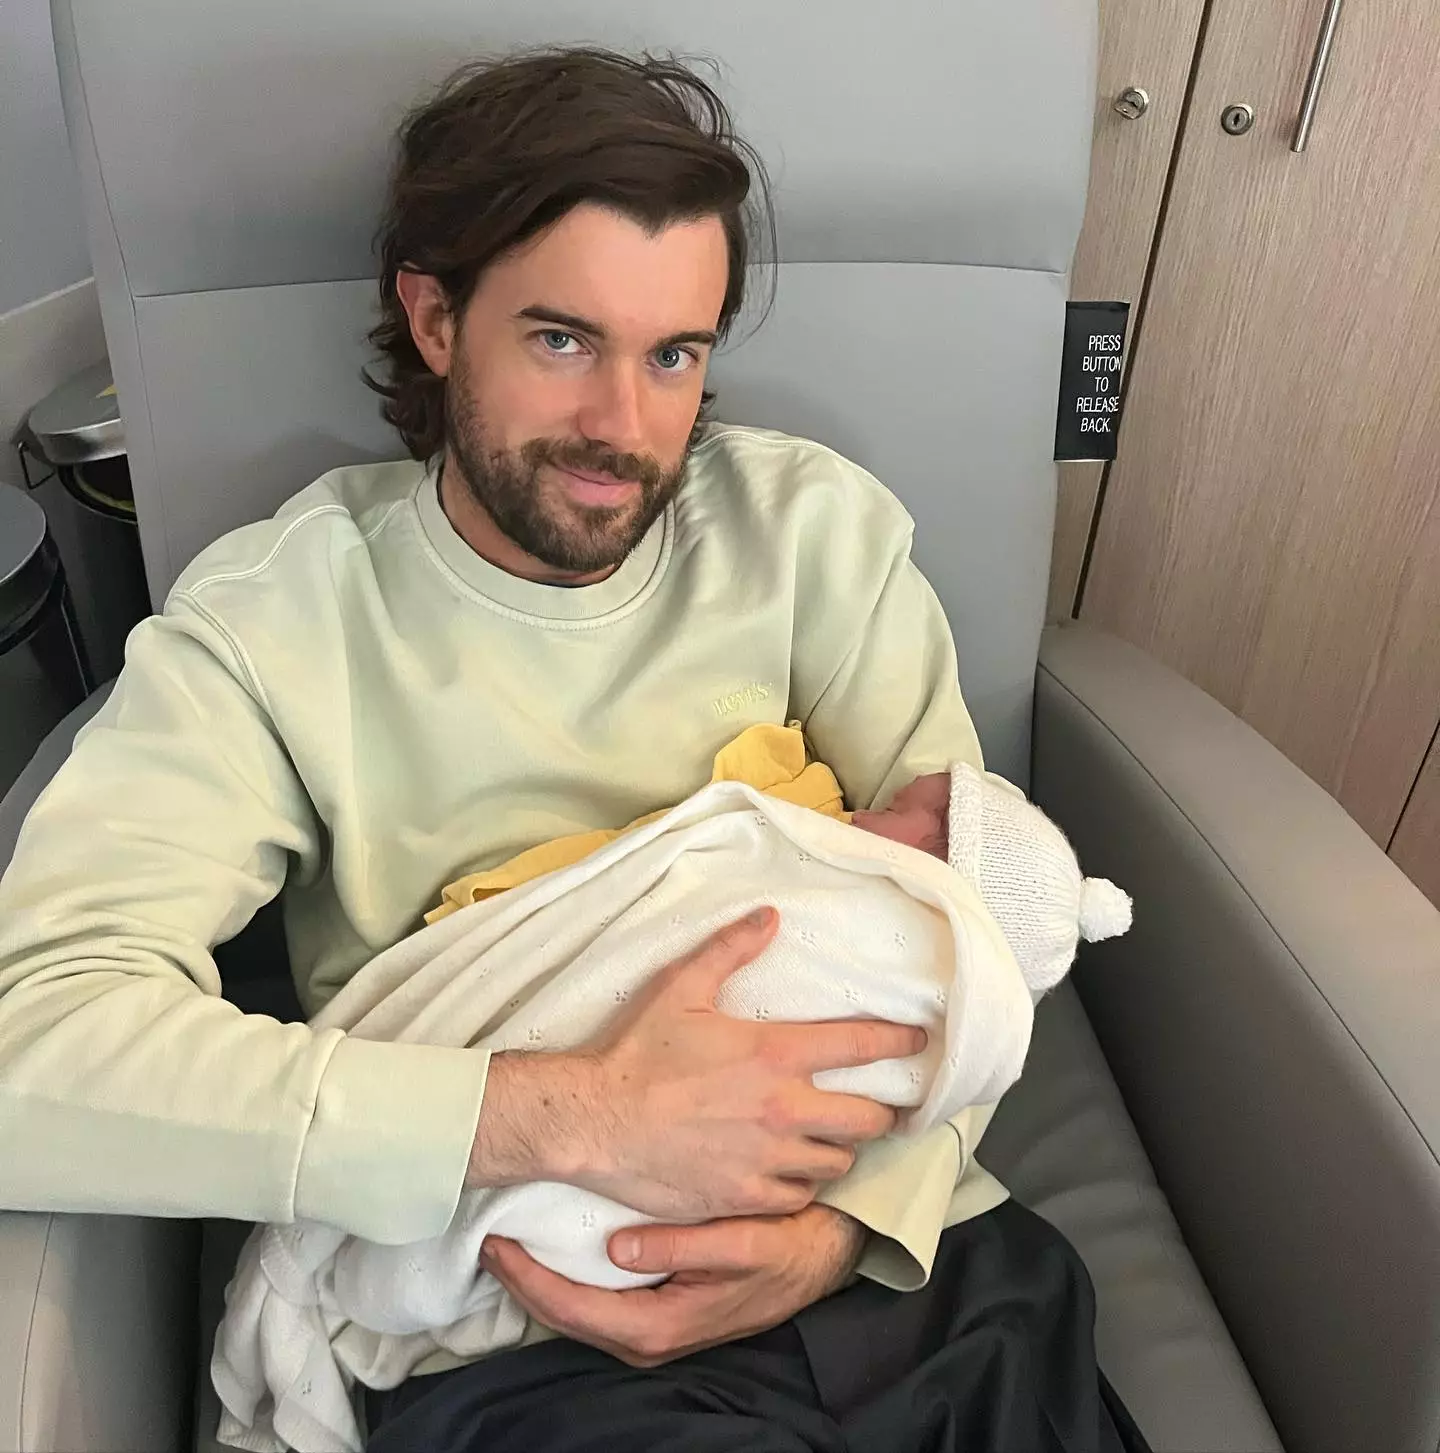 Jack Whitehall welcomed his first child earlier this month.